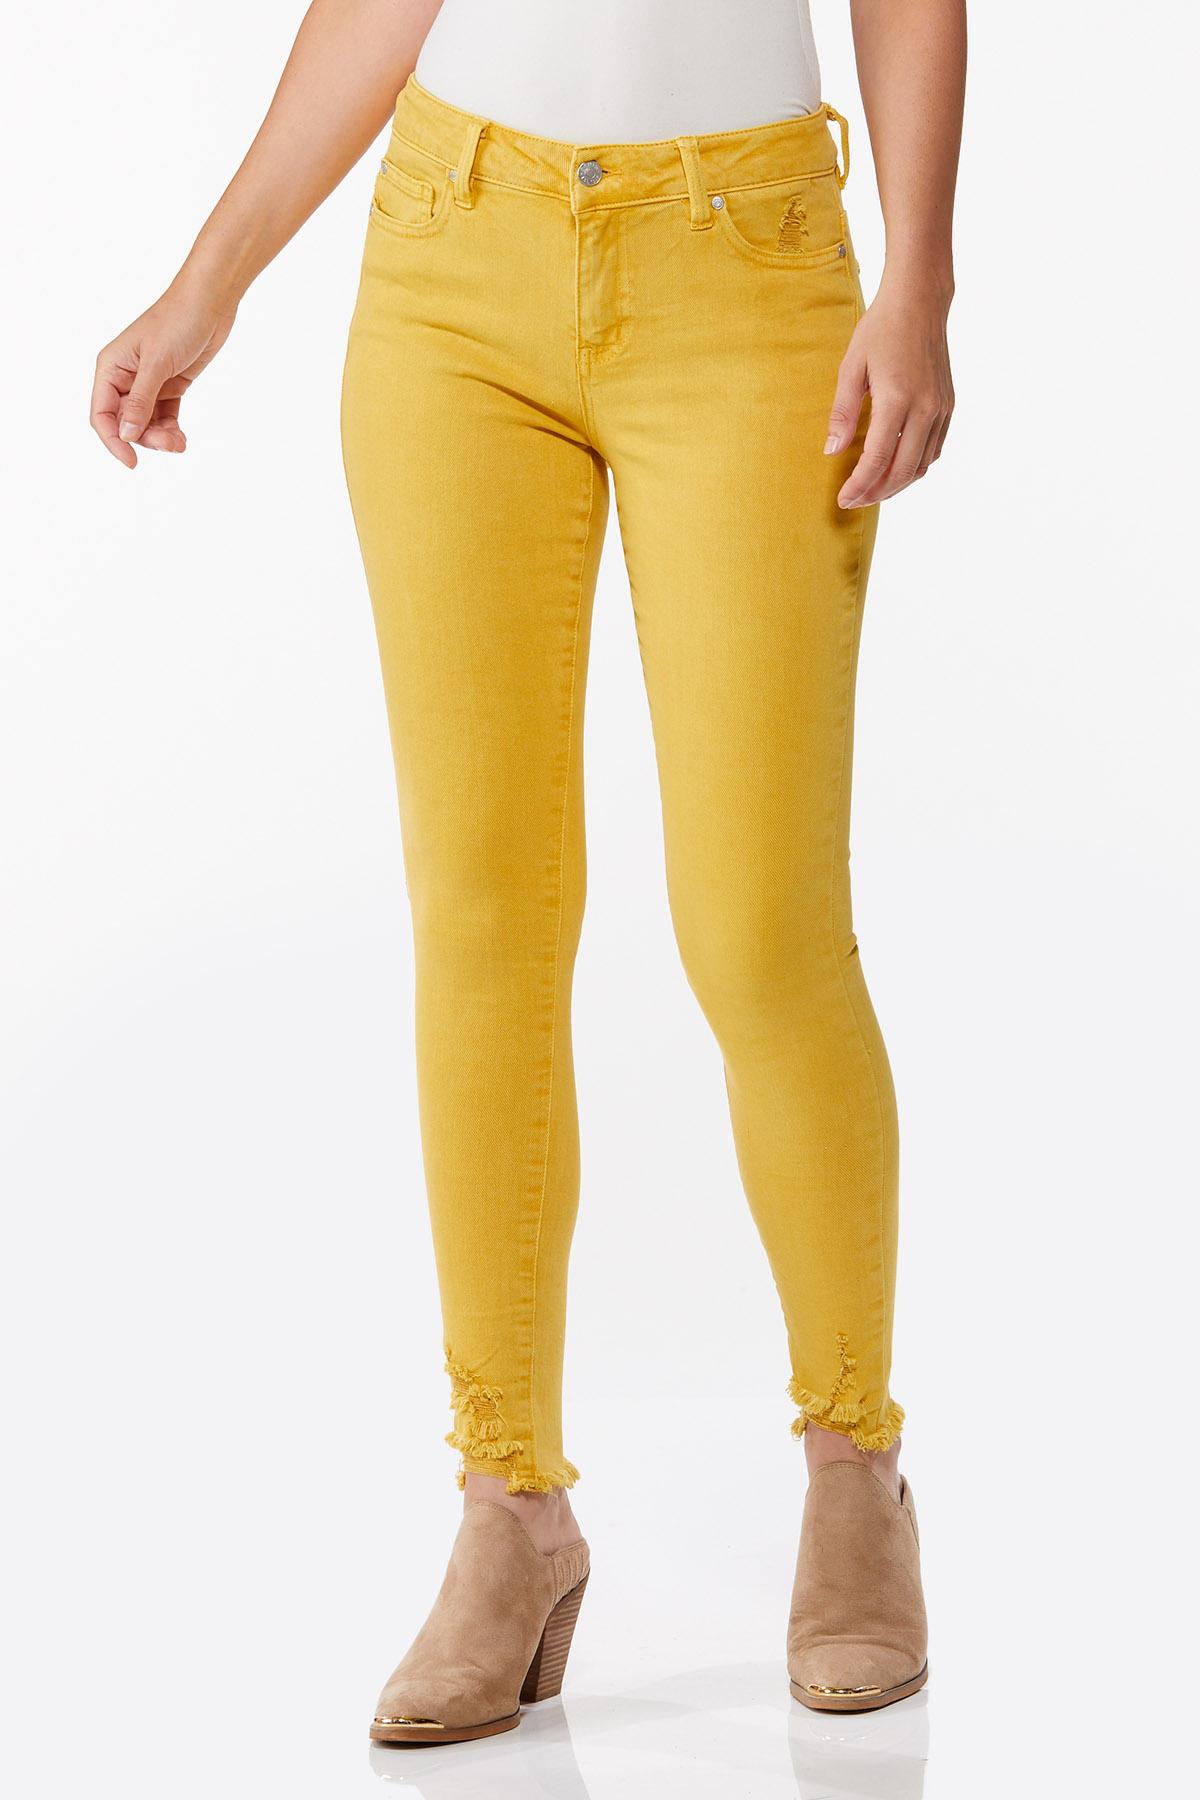 Dyed Gold Jeggings